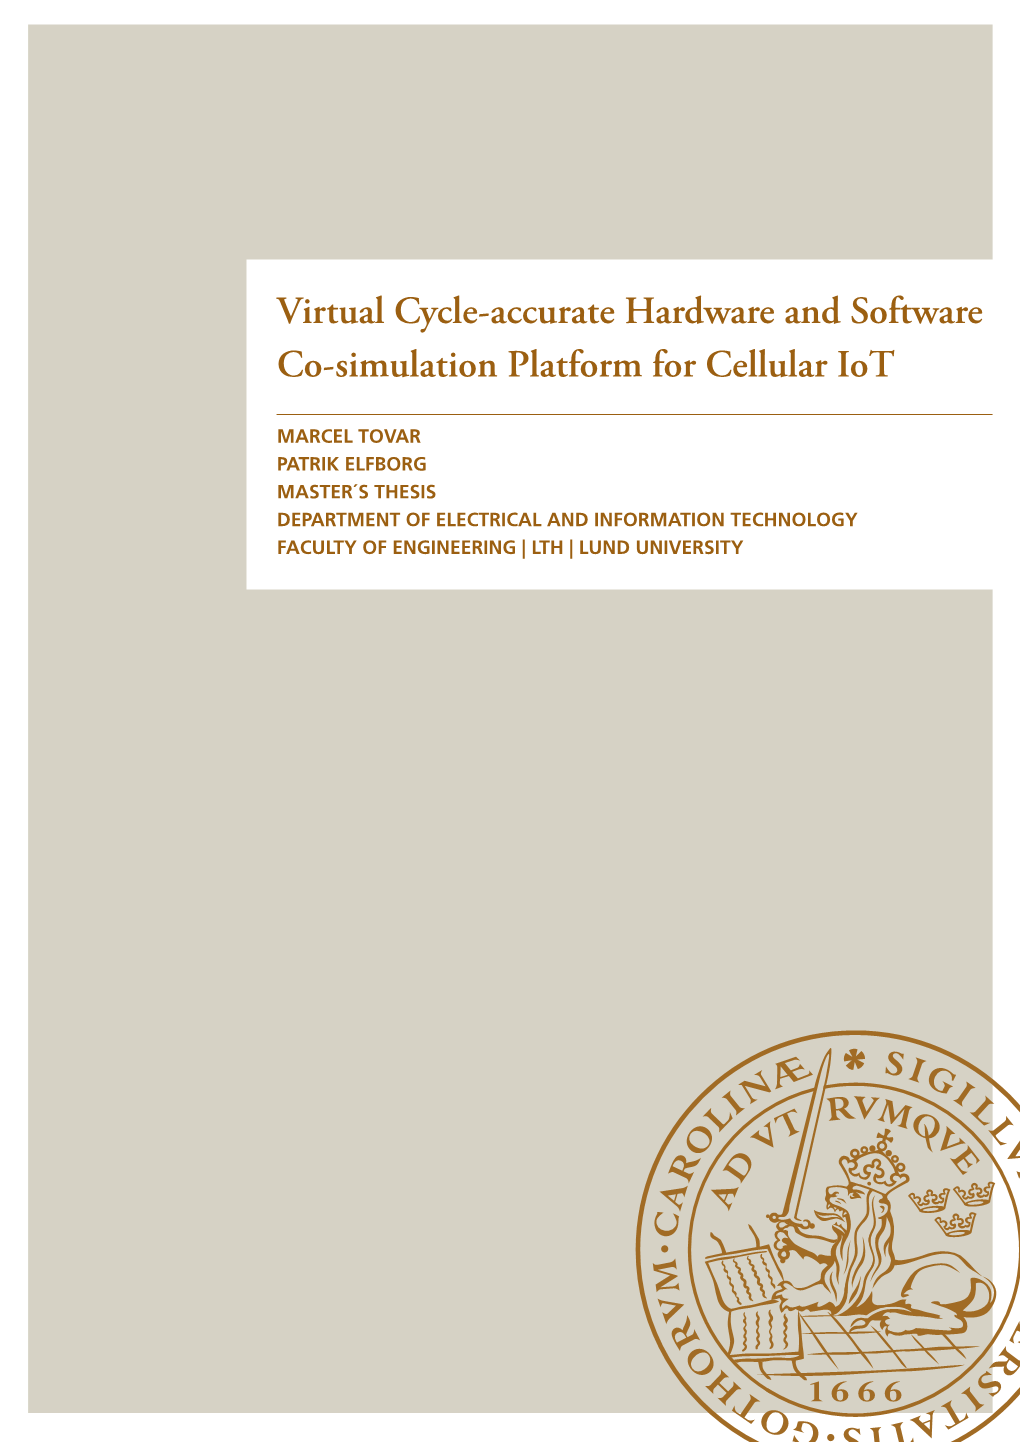 Virtual Cycle-Accurate Hardware and Software Co-Simulation Platform for Cellular Iot